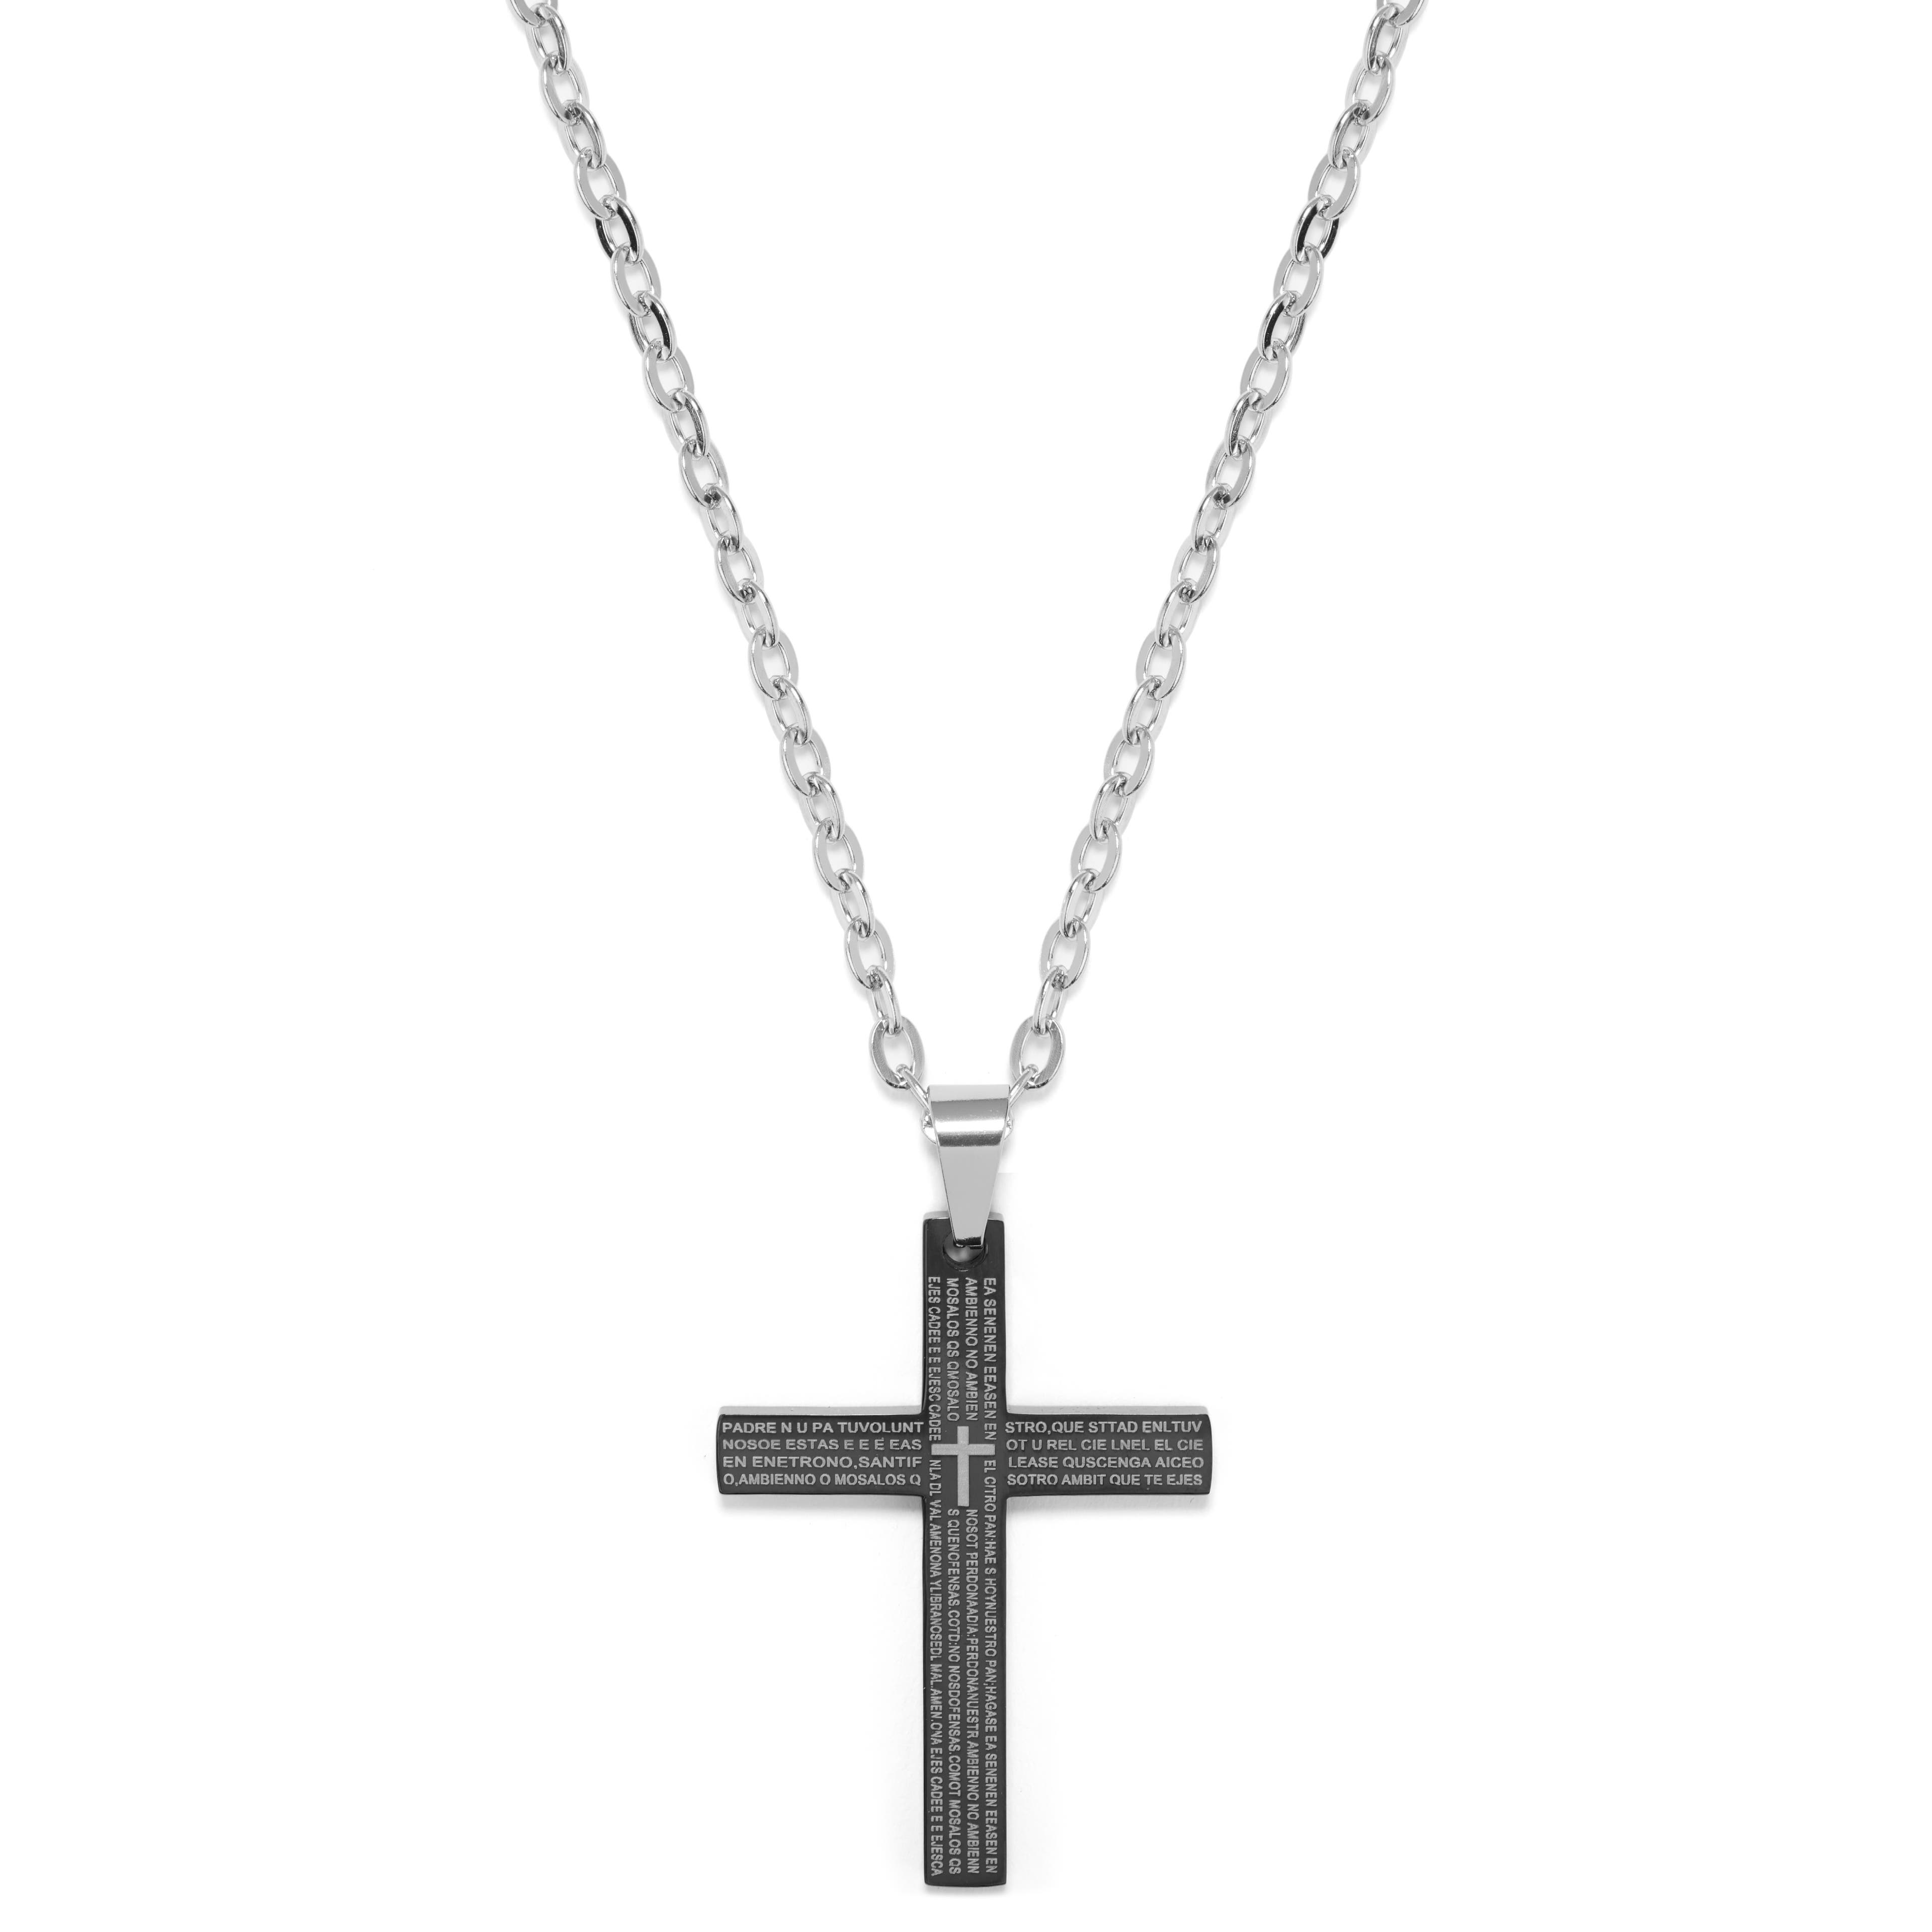 Small Black Cross with Stainless Steel Necklace